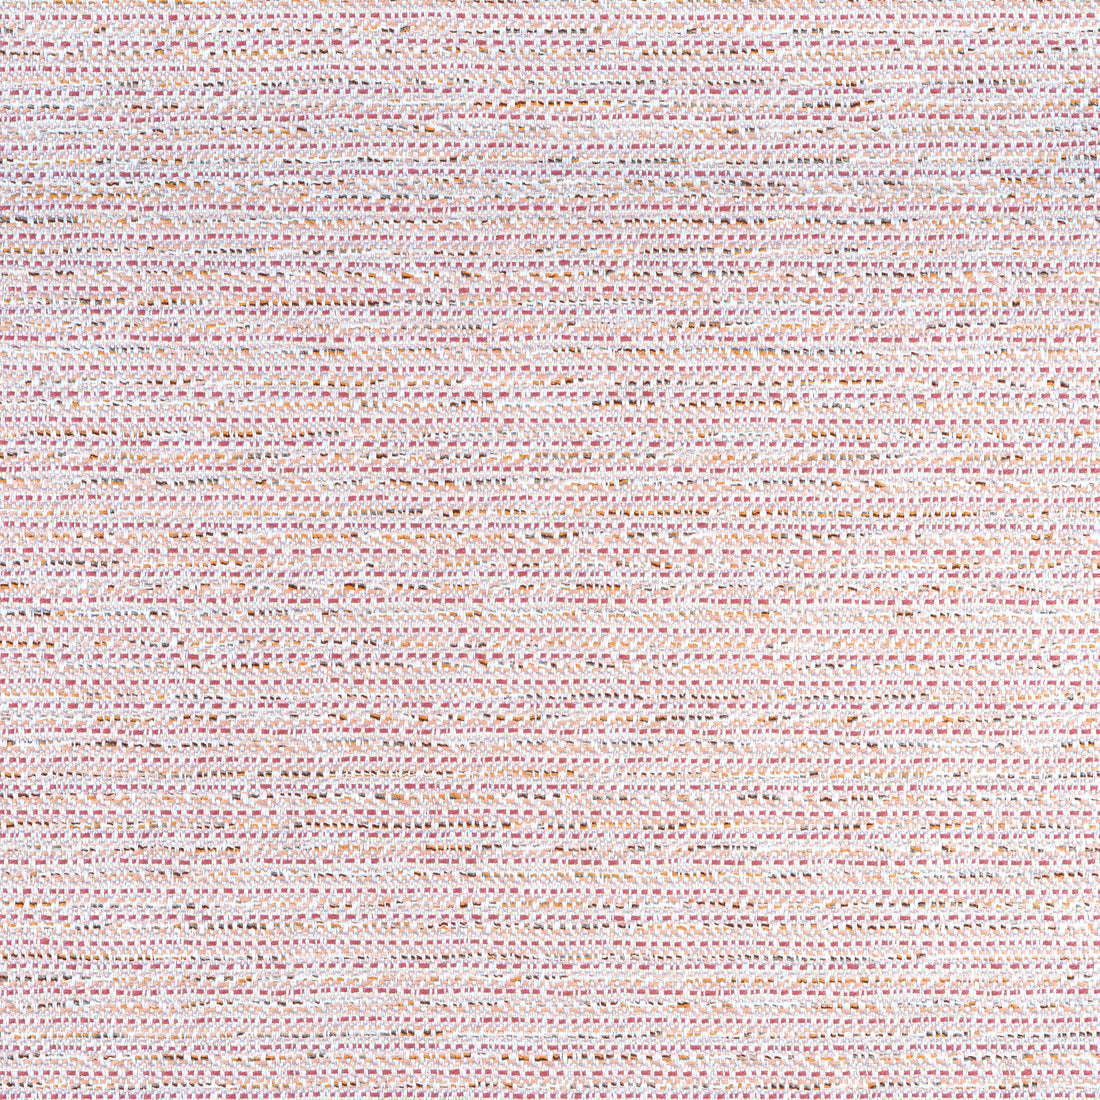 Elements fabric in blush color - pattern number W75246 - by Thibaut in the Elements collection